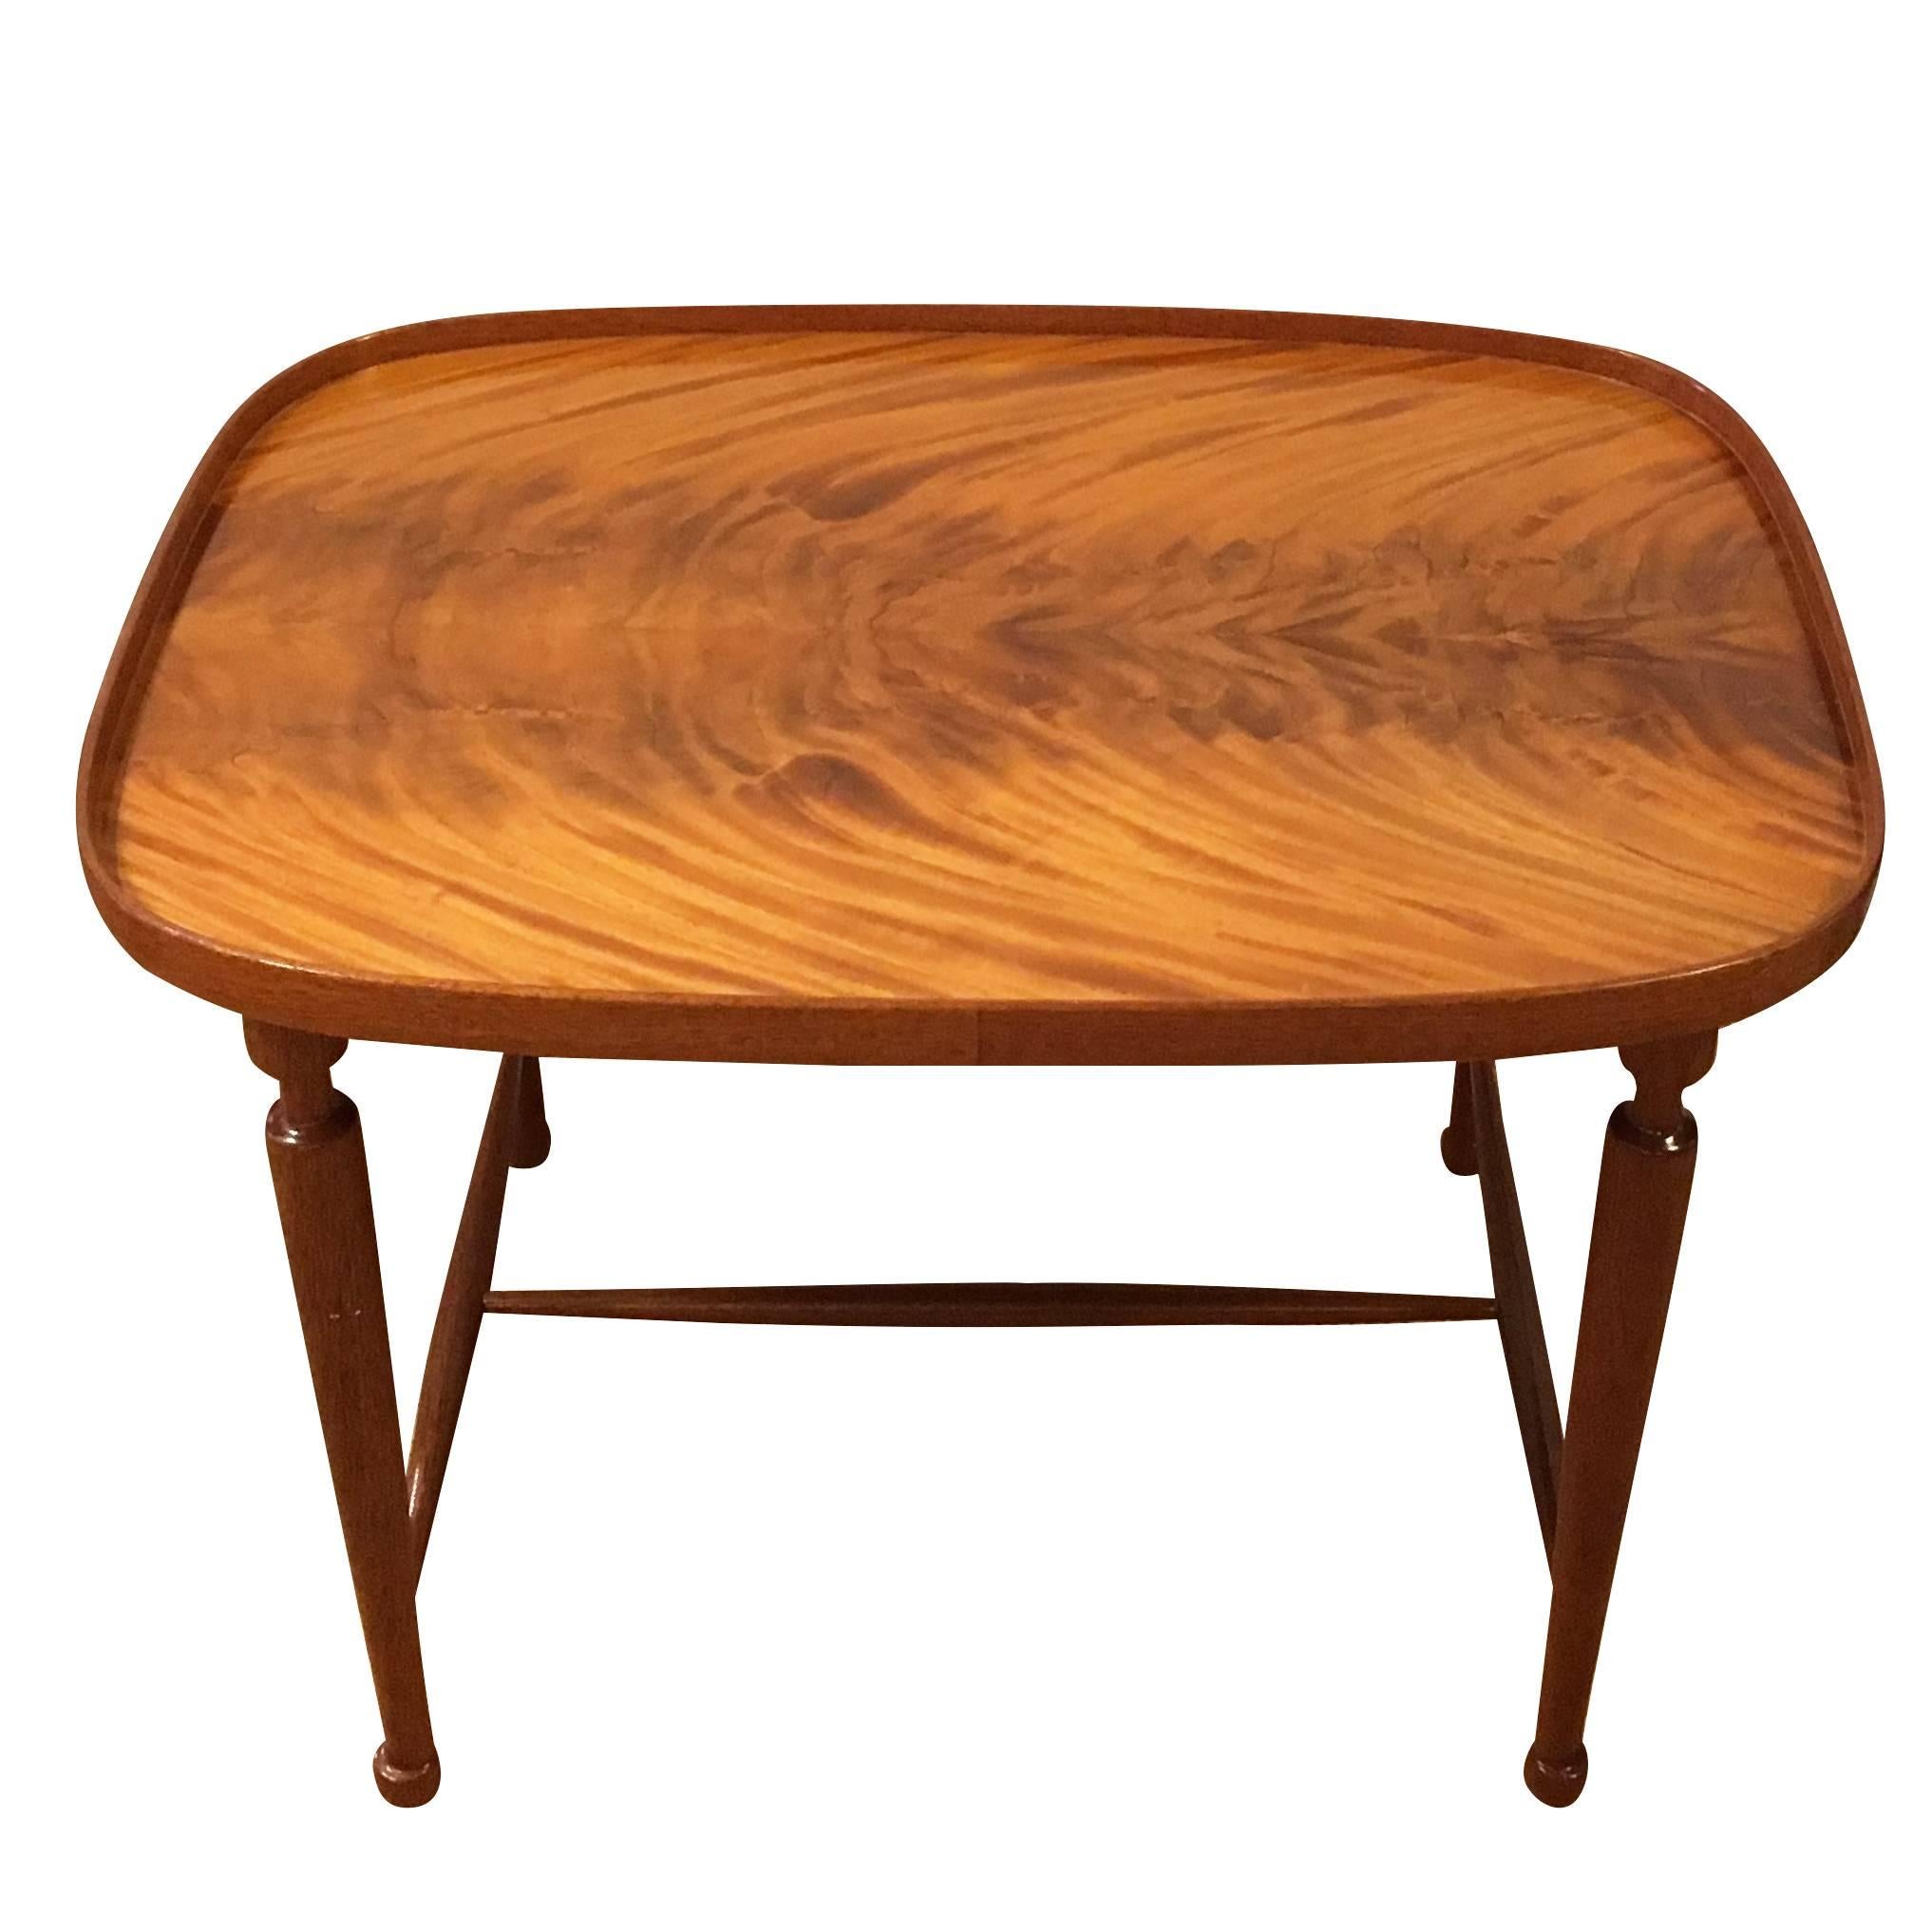 A dark-brown, vintage Art Deco Swedish coffee, sofa table made of hand crafted polished cuban mahogany wood, designed by Josef Frank and produced by Svensk Tenn in good condition. The Scandinavian side table is standing on four straight wooden legs,